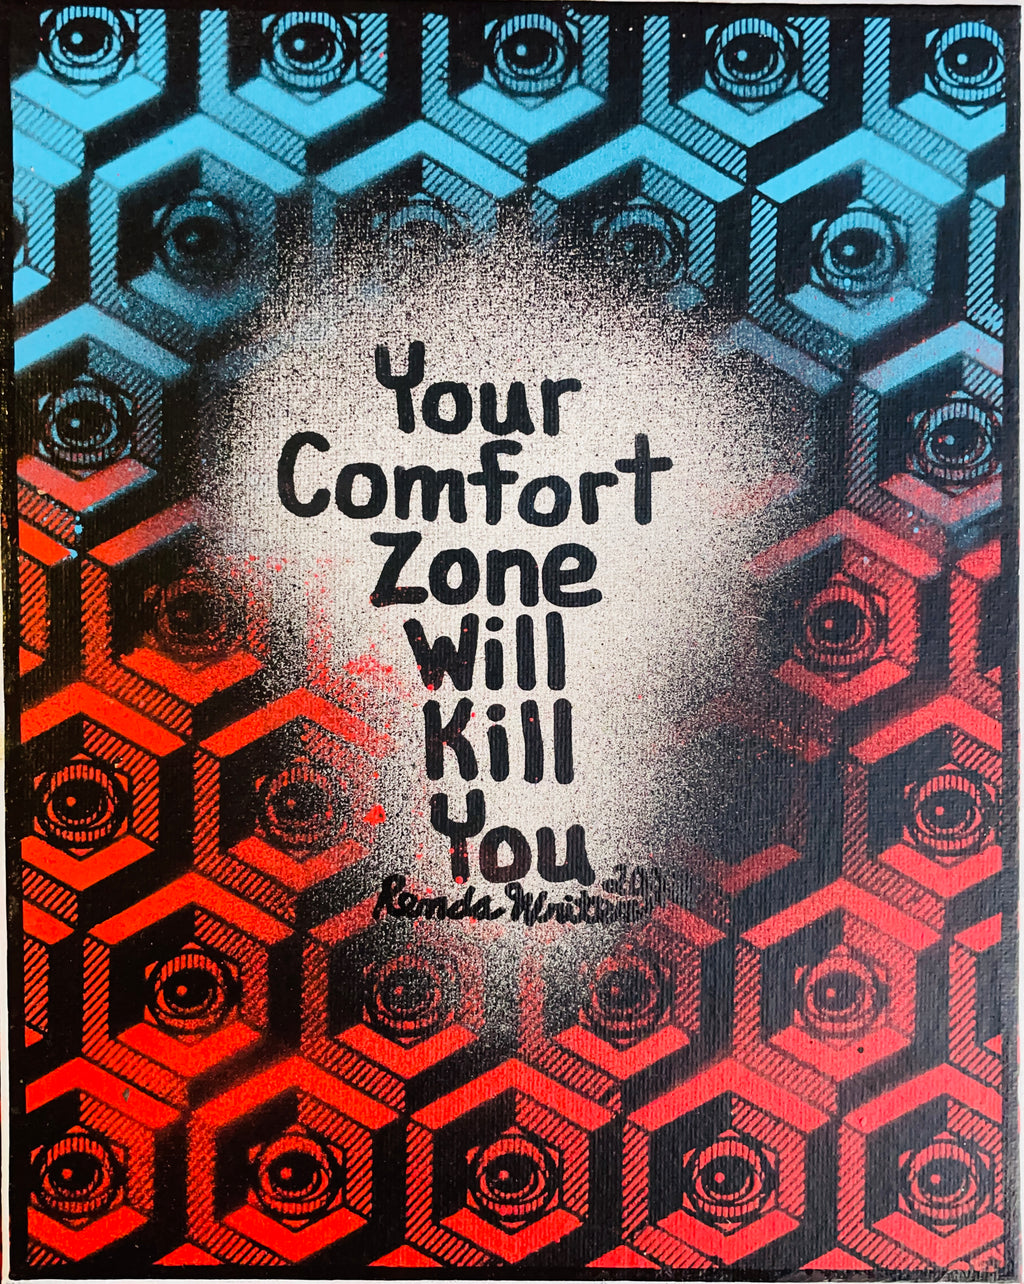 Renda Writer “Your Comfort Zone will Kill You” @EYEZ C👁LLAB👁RATE Painting Pattern